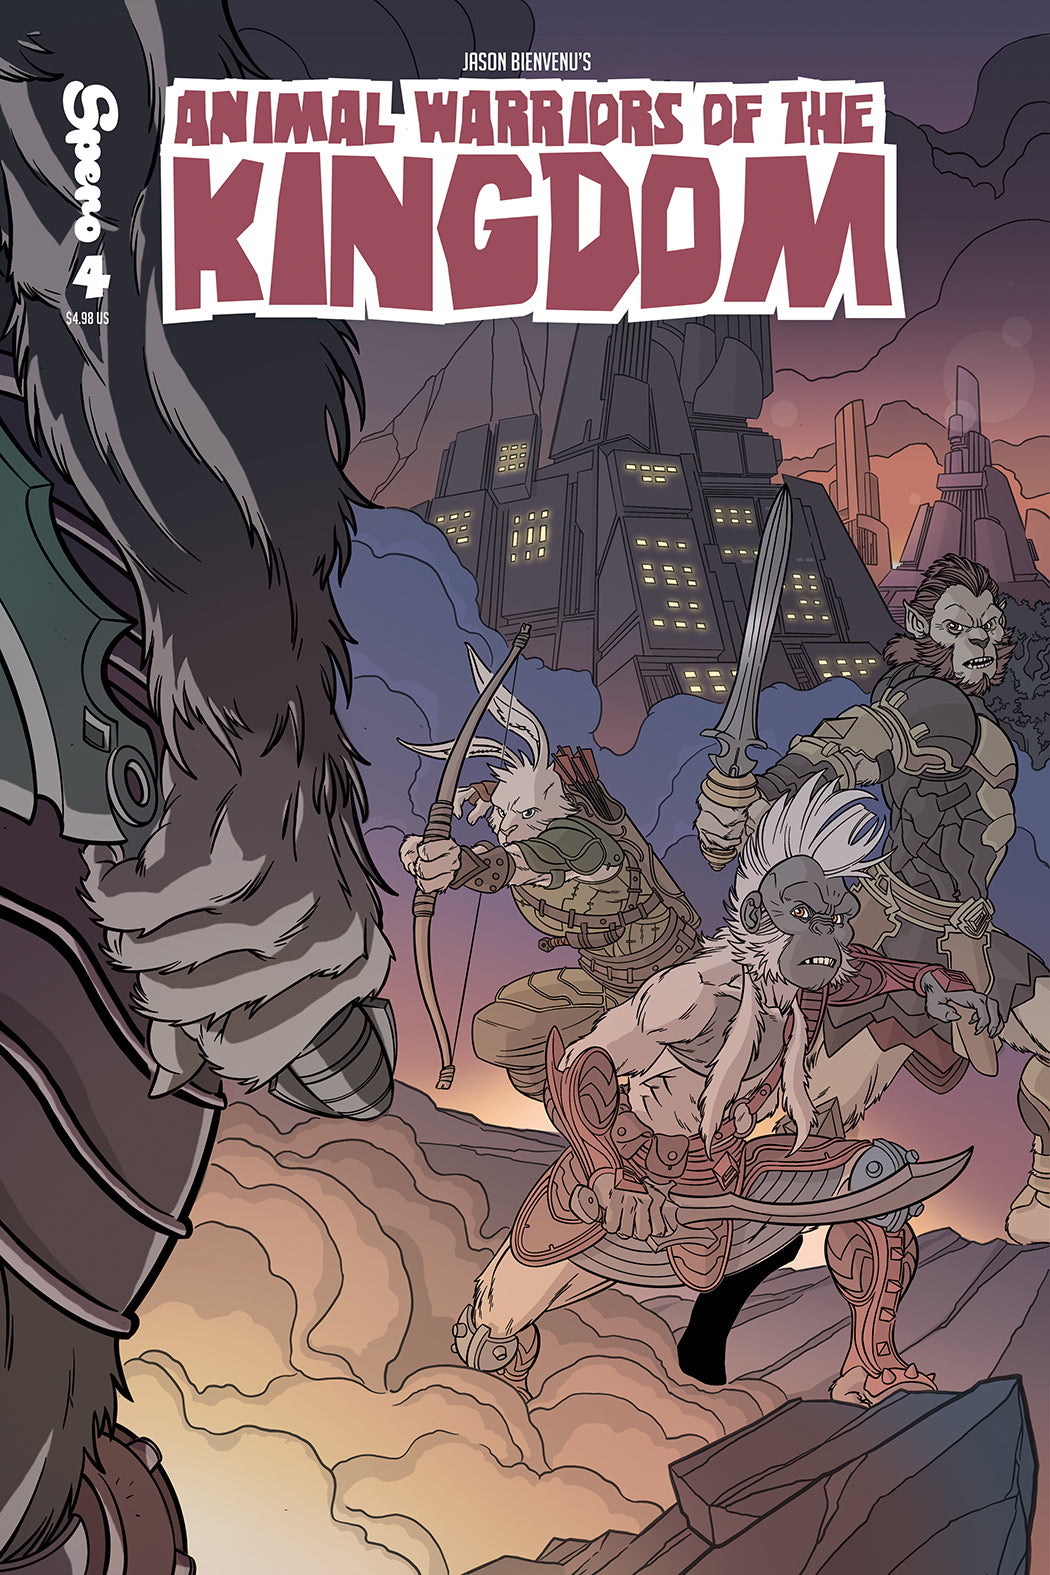 ANIMAL WARRIORS OF THE KINGDOM ISSUE #4 -Physical Copy